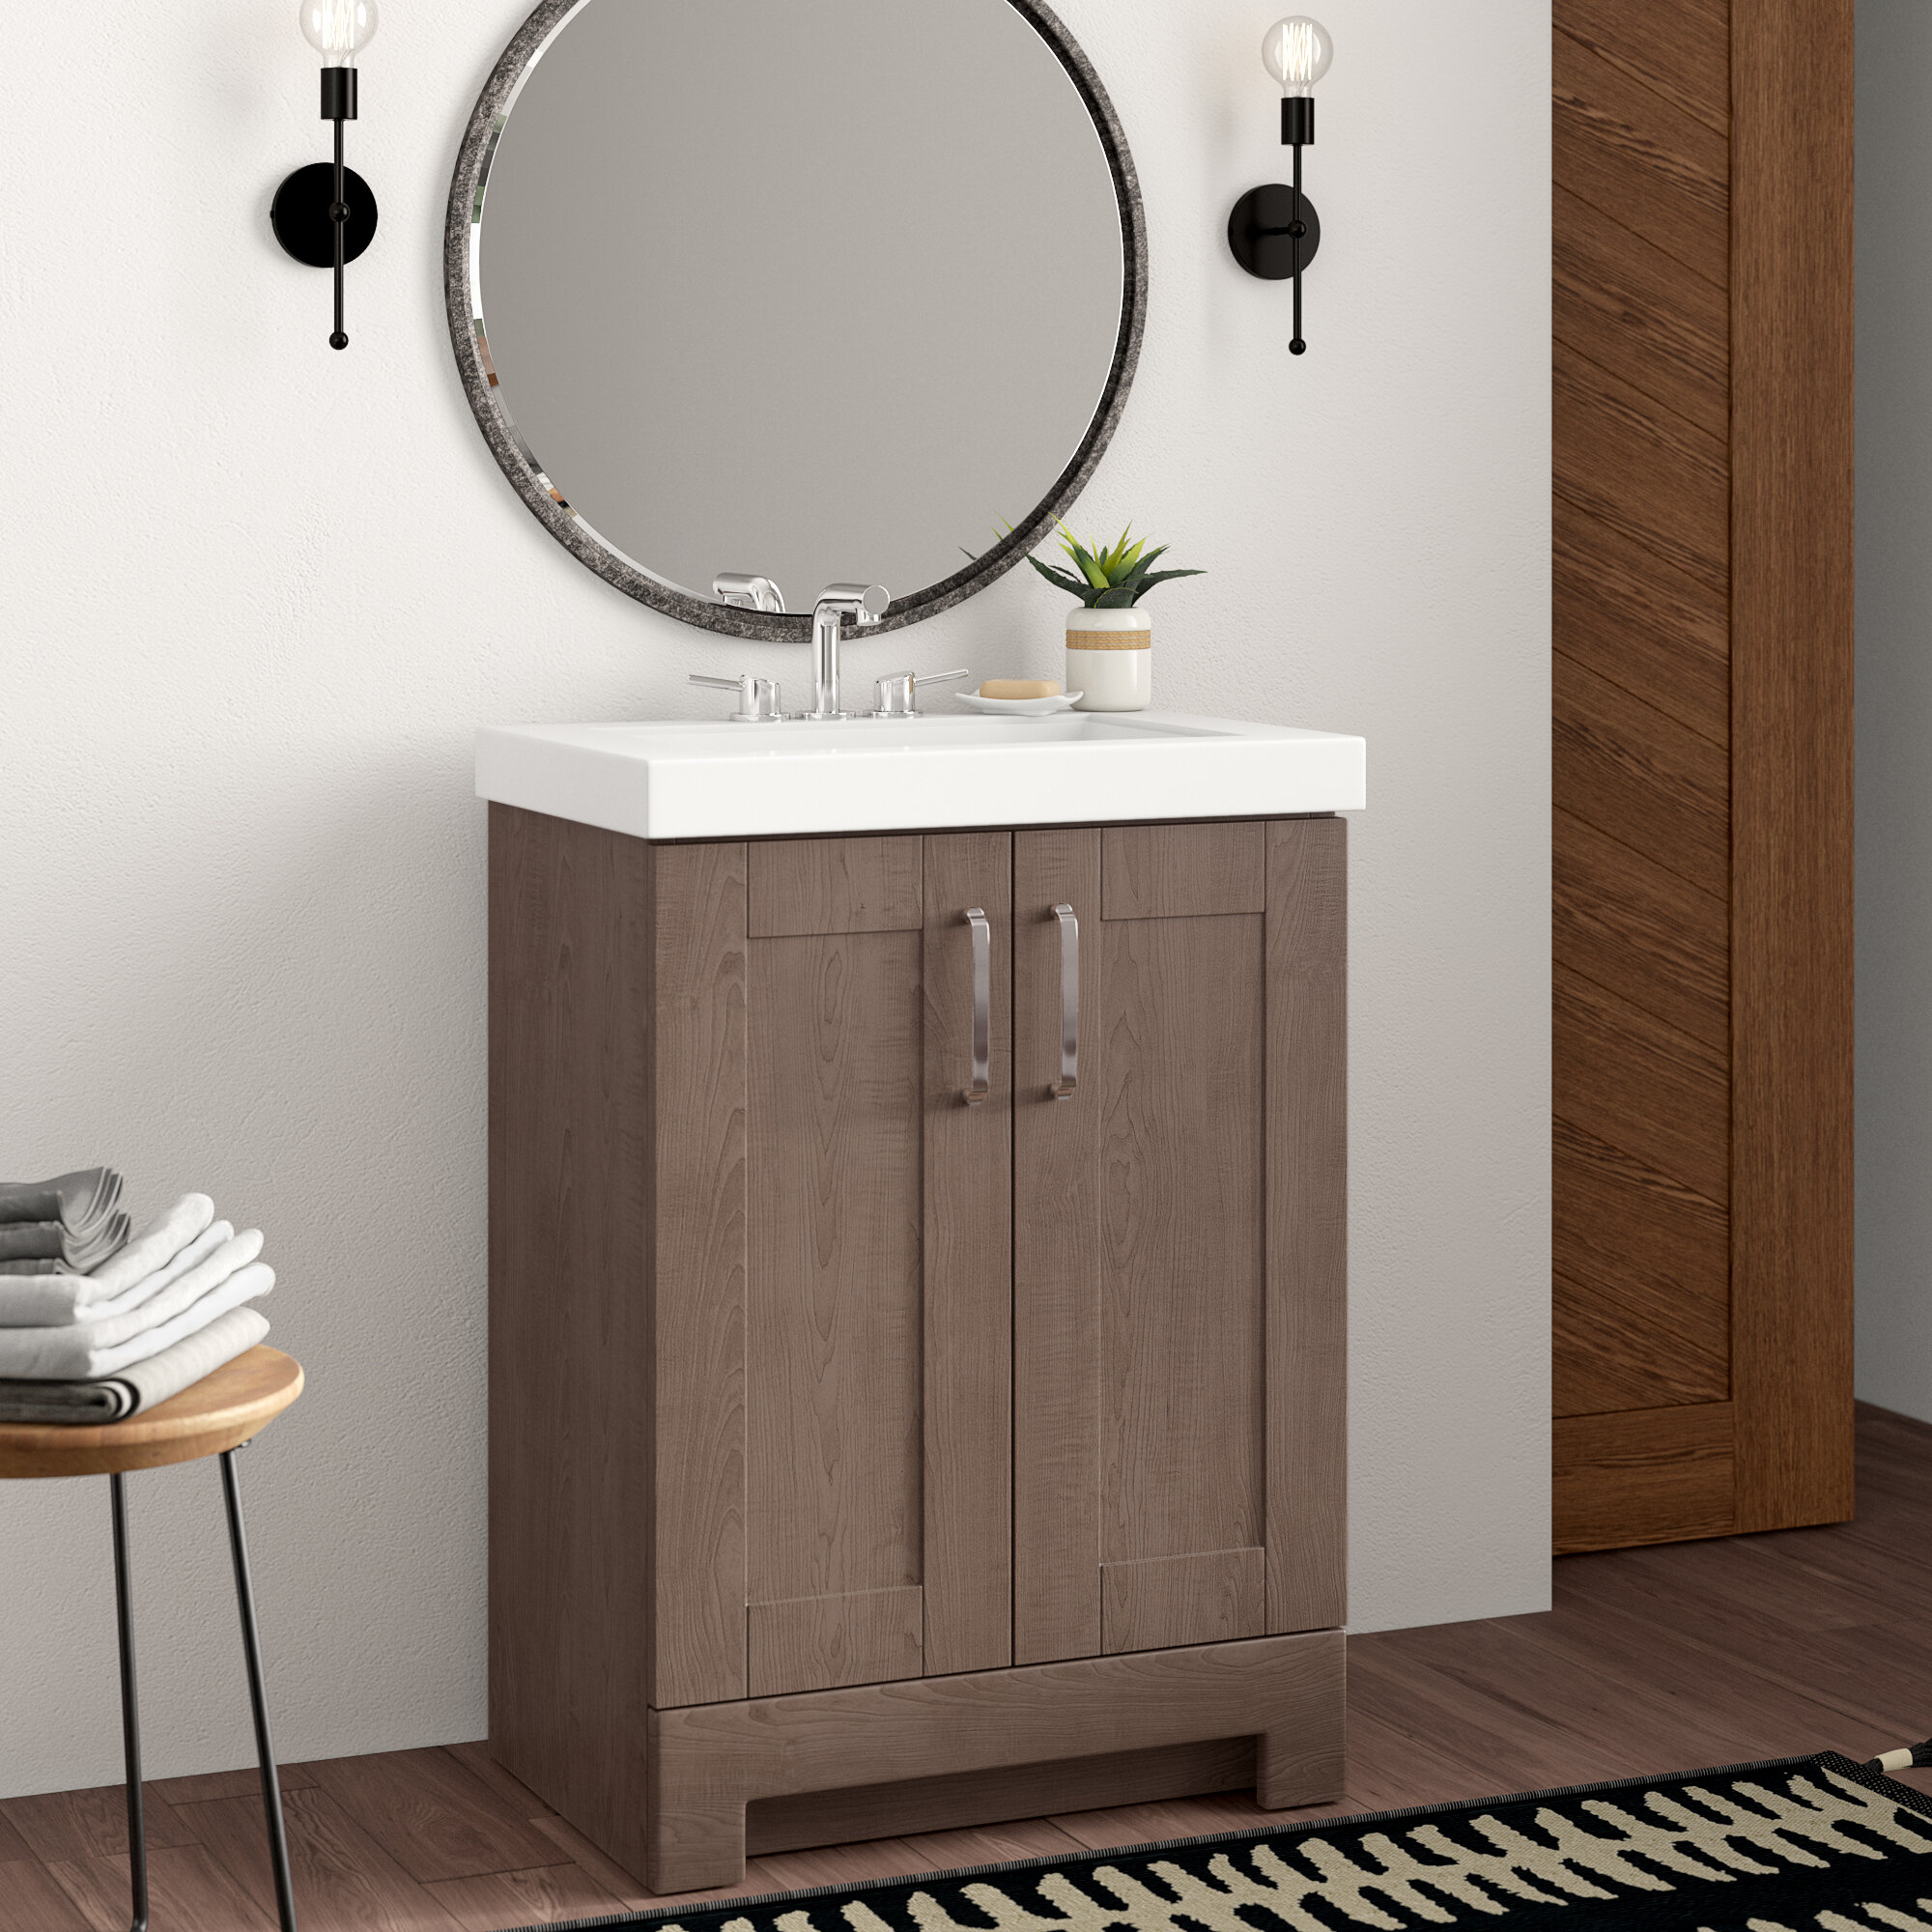 25 Incredible Vanities For Small Bathrooms With Examples Images